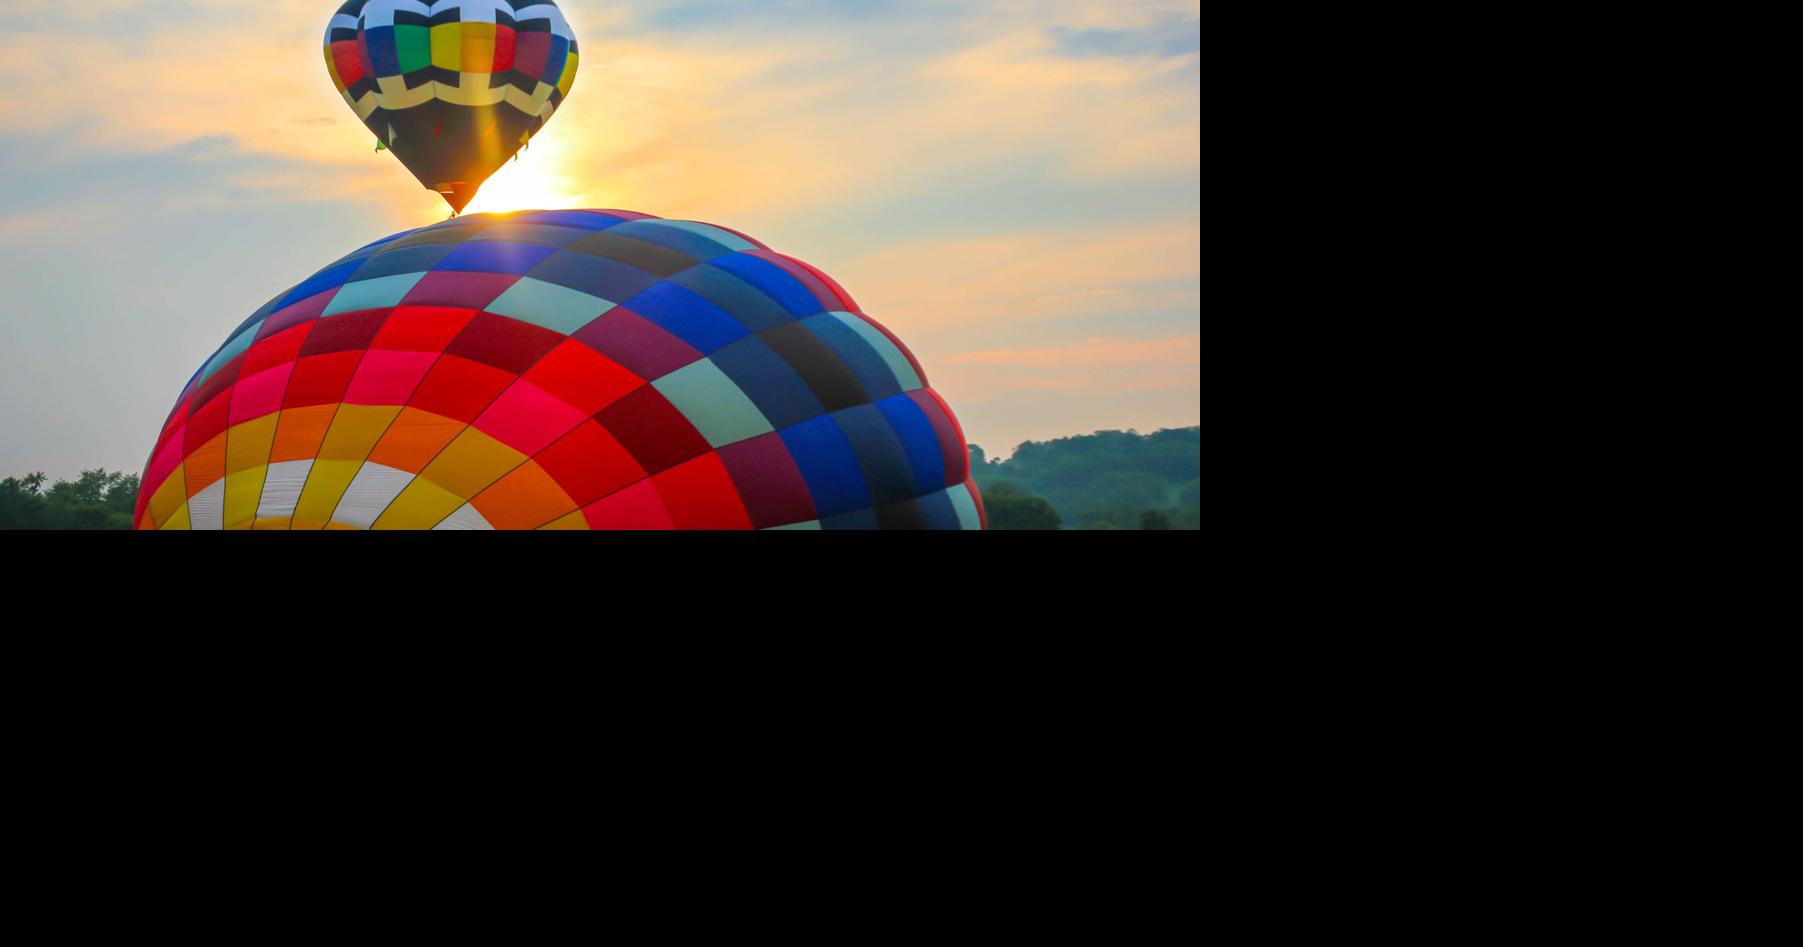 Making it fly Second year of Balloon Festival ready for lift off